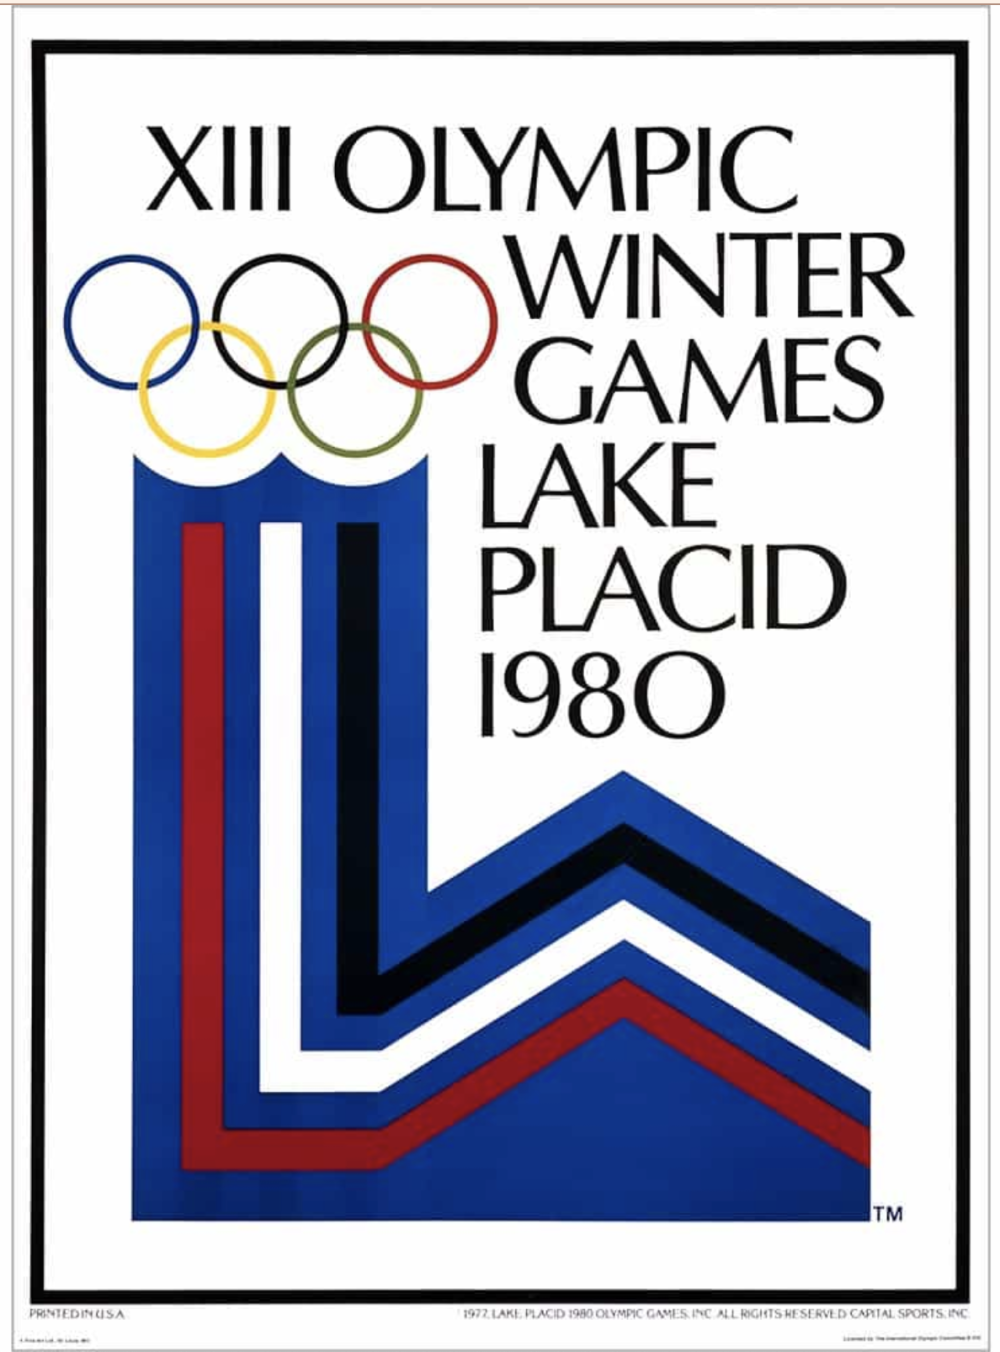 An image of the official poster for the 1980 Olympic Winter Games.